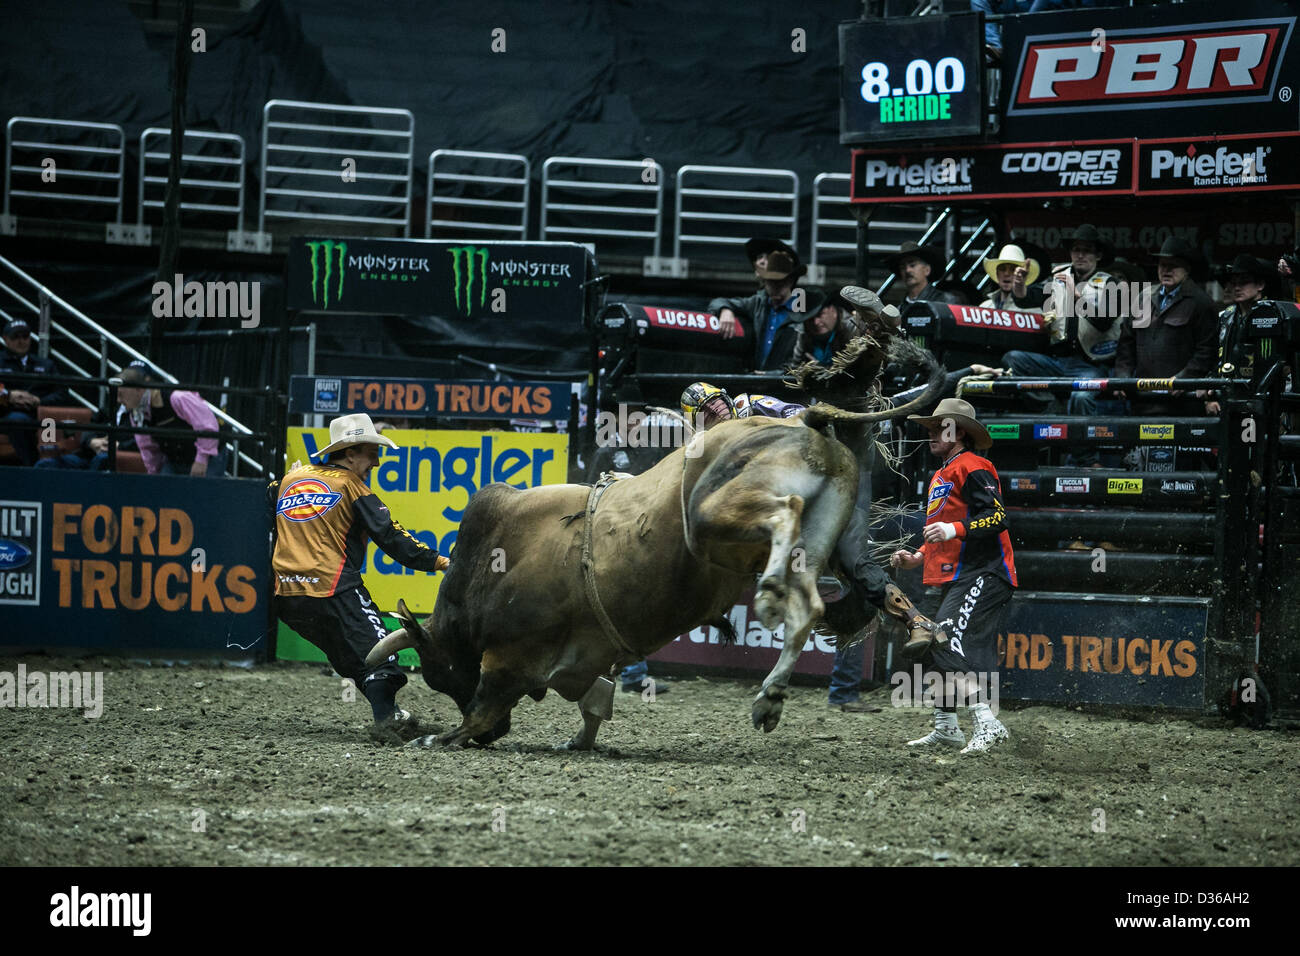 08.02.2013. Anaheim, Califonria, USA.  Luke Snyder (Raymore, MO) riding bull Pit Boss . While Bull Fighter Frank Newsom protects him during the Professional Bull Riders, Liftmaster Invitational at the Honda Center in Anaheim, CA. � Action Plus Sports Images / Alamy Stock Photo